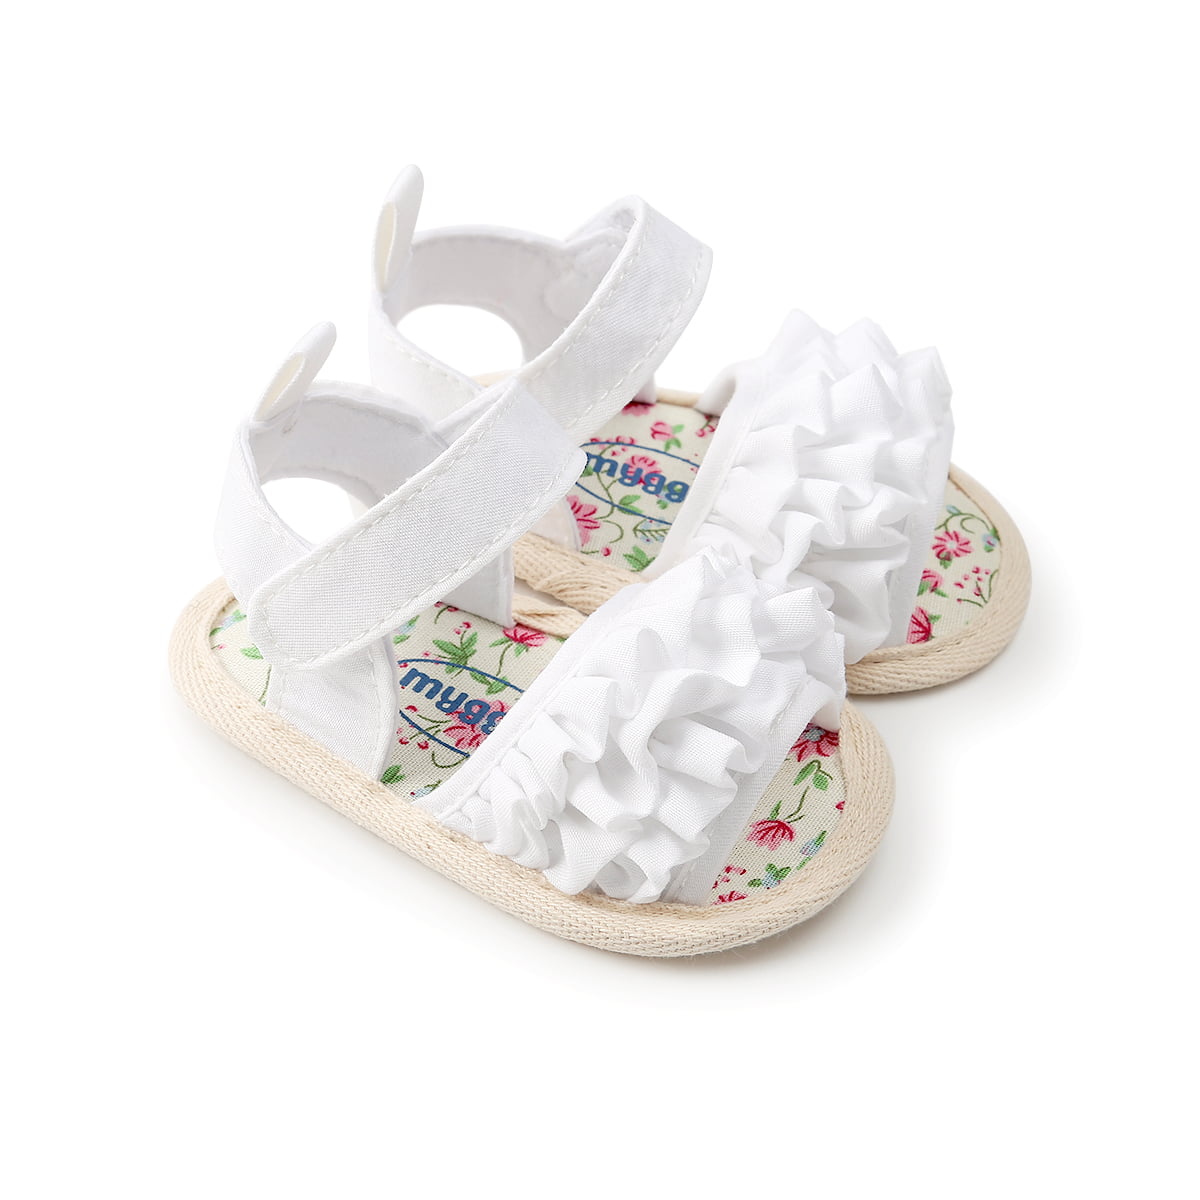 soft sandals for toddlers